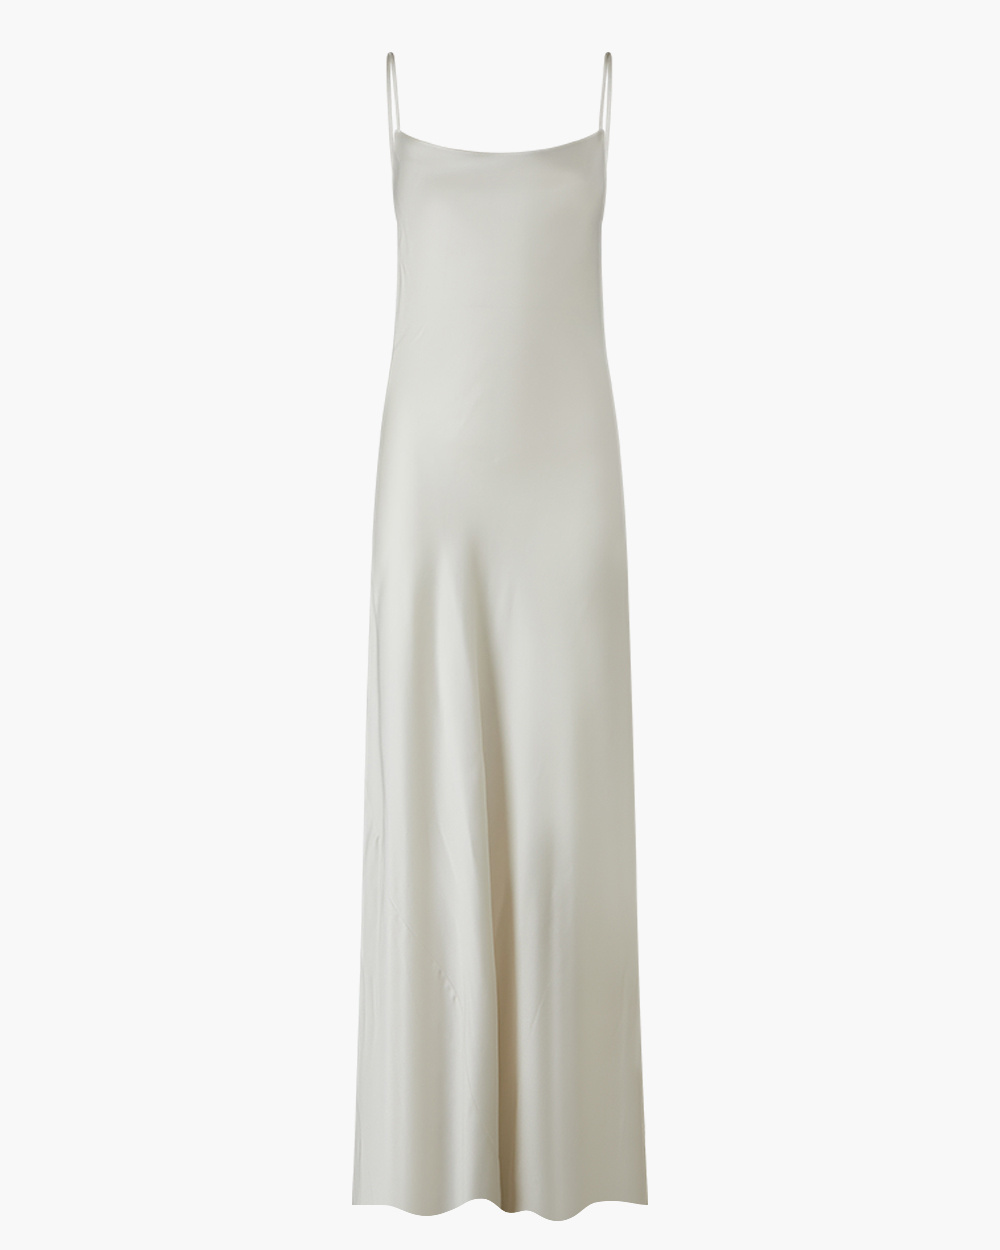 ABITO MAXI ISABELLE IN SATIN BIANCO